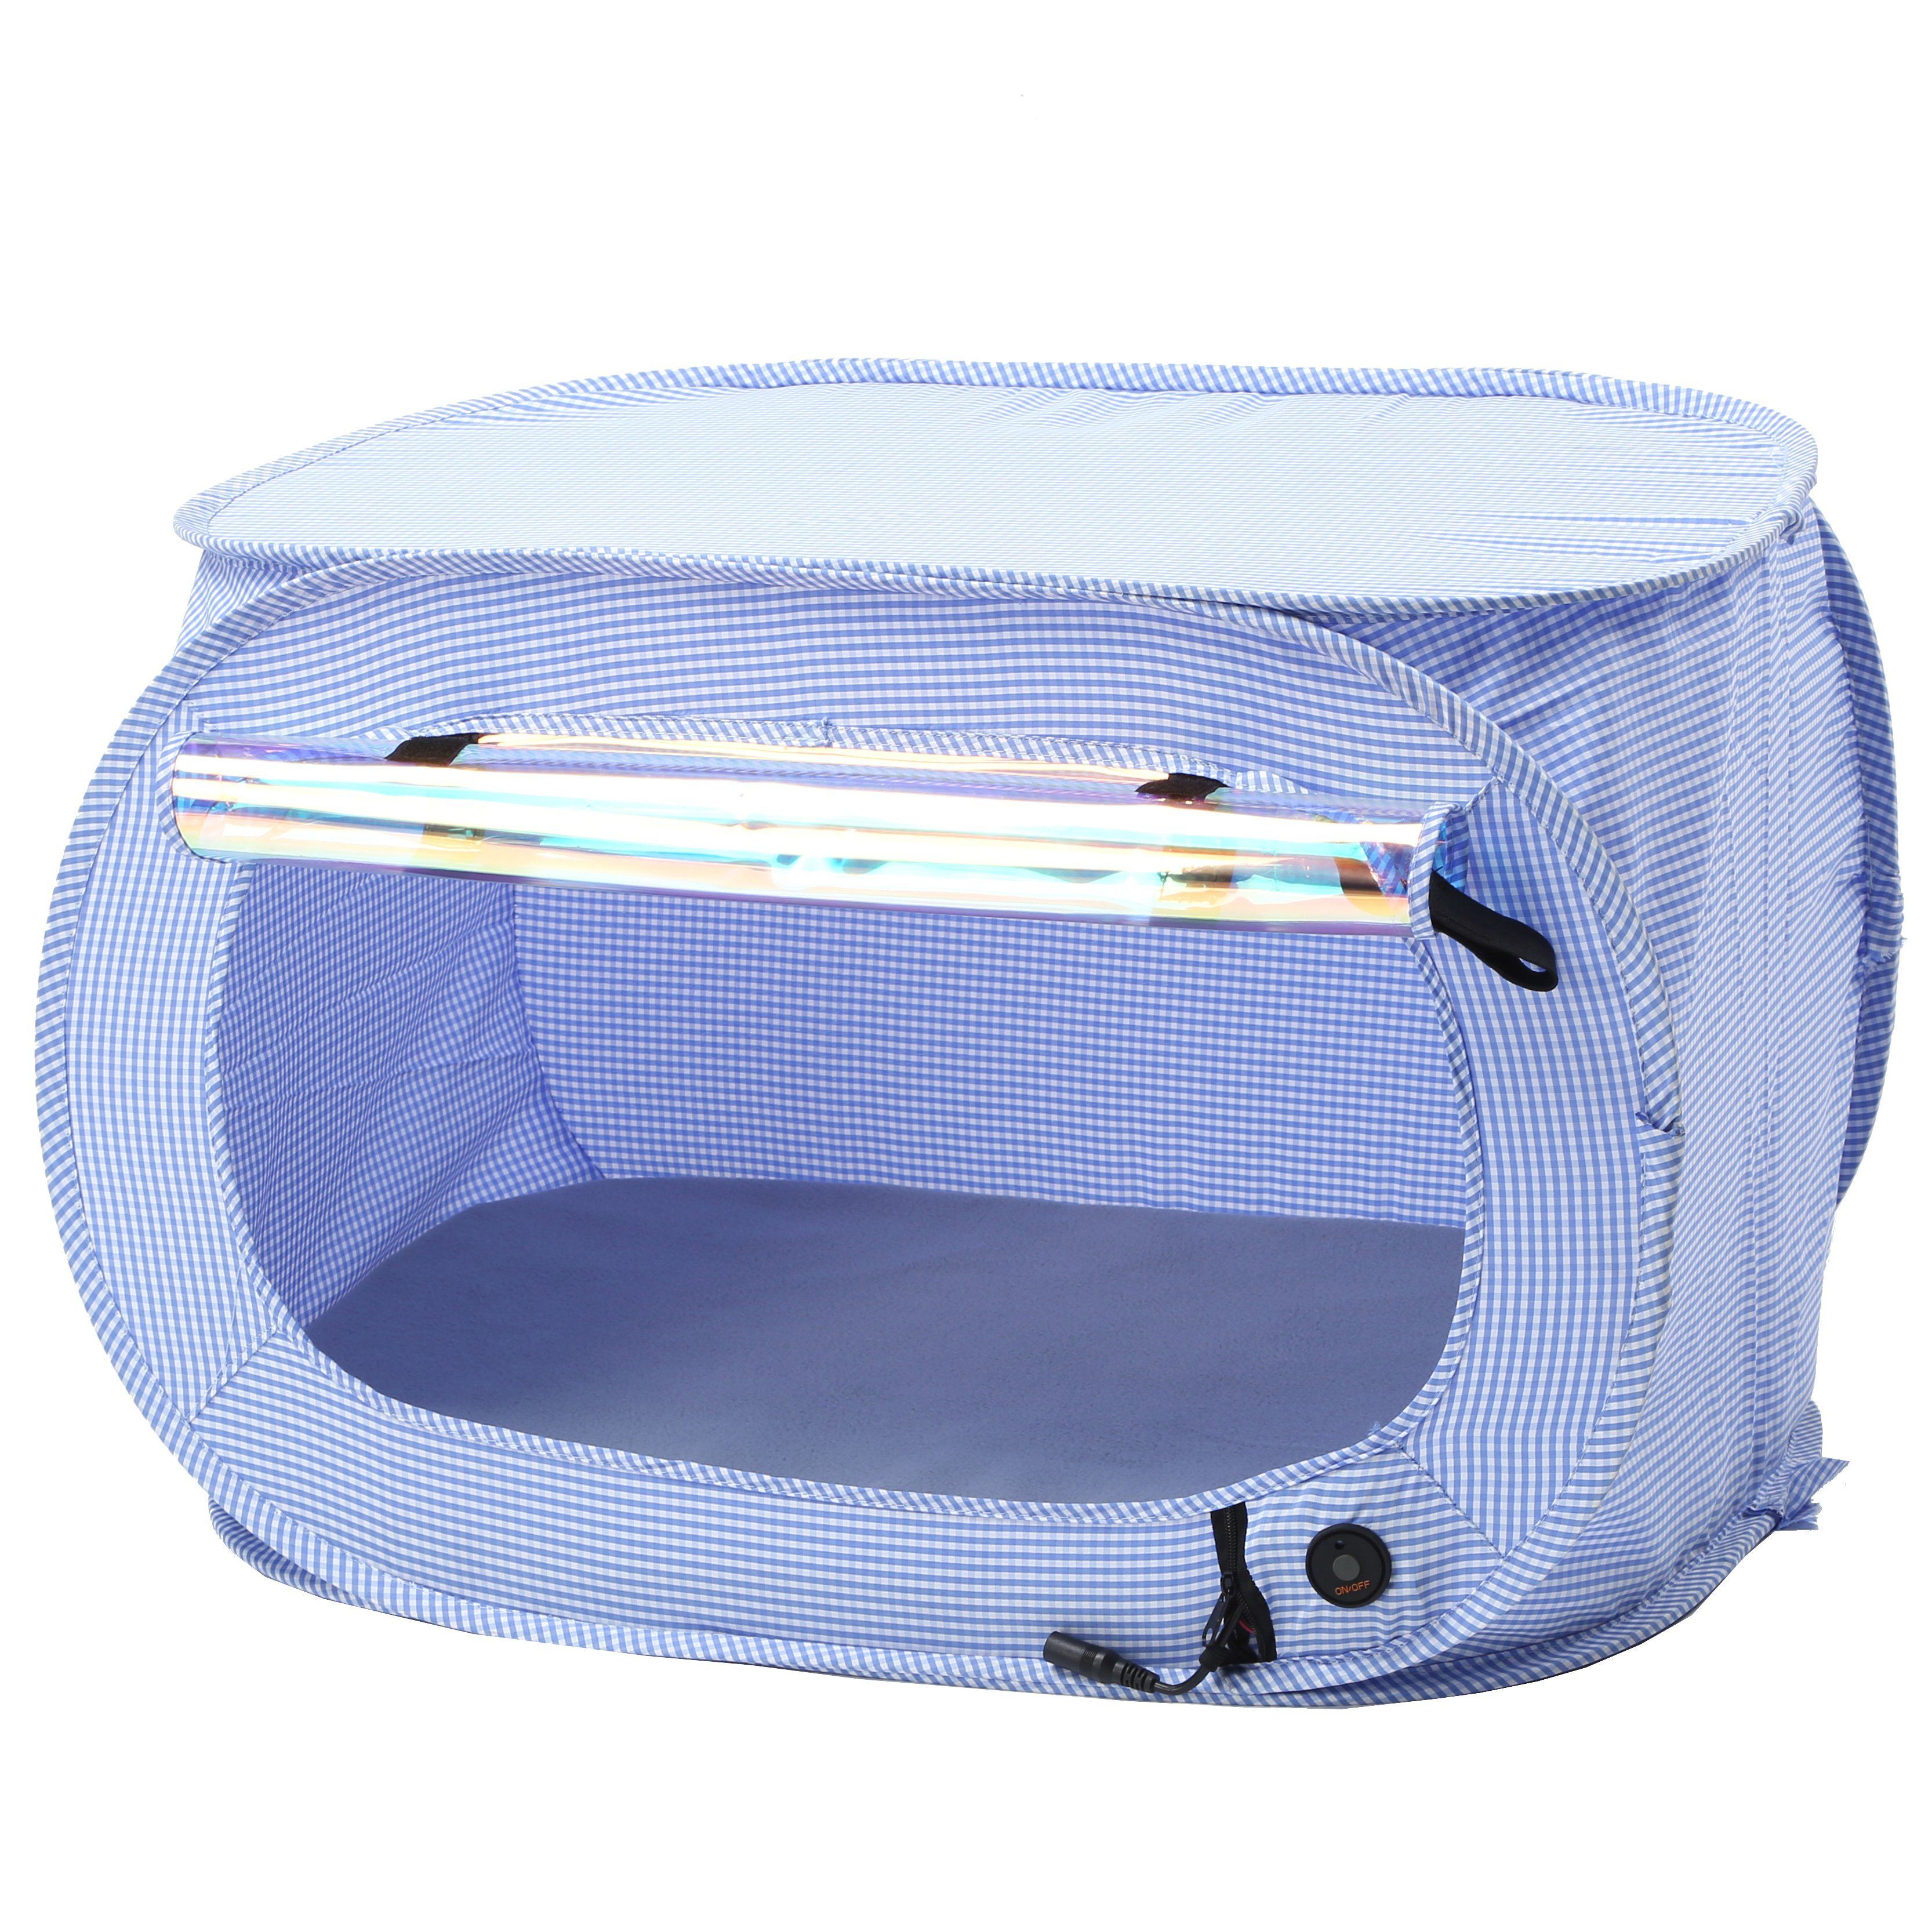 Pet Life "Enterlude" Electric Heating Wire Folding Travel Pet Tent Crate Blue 